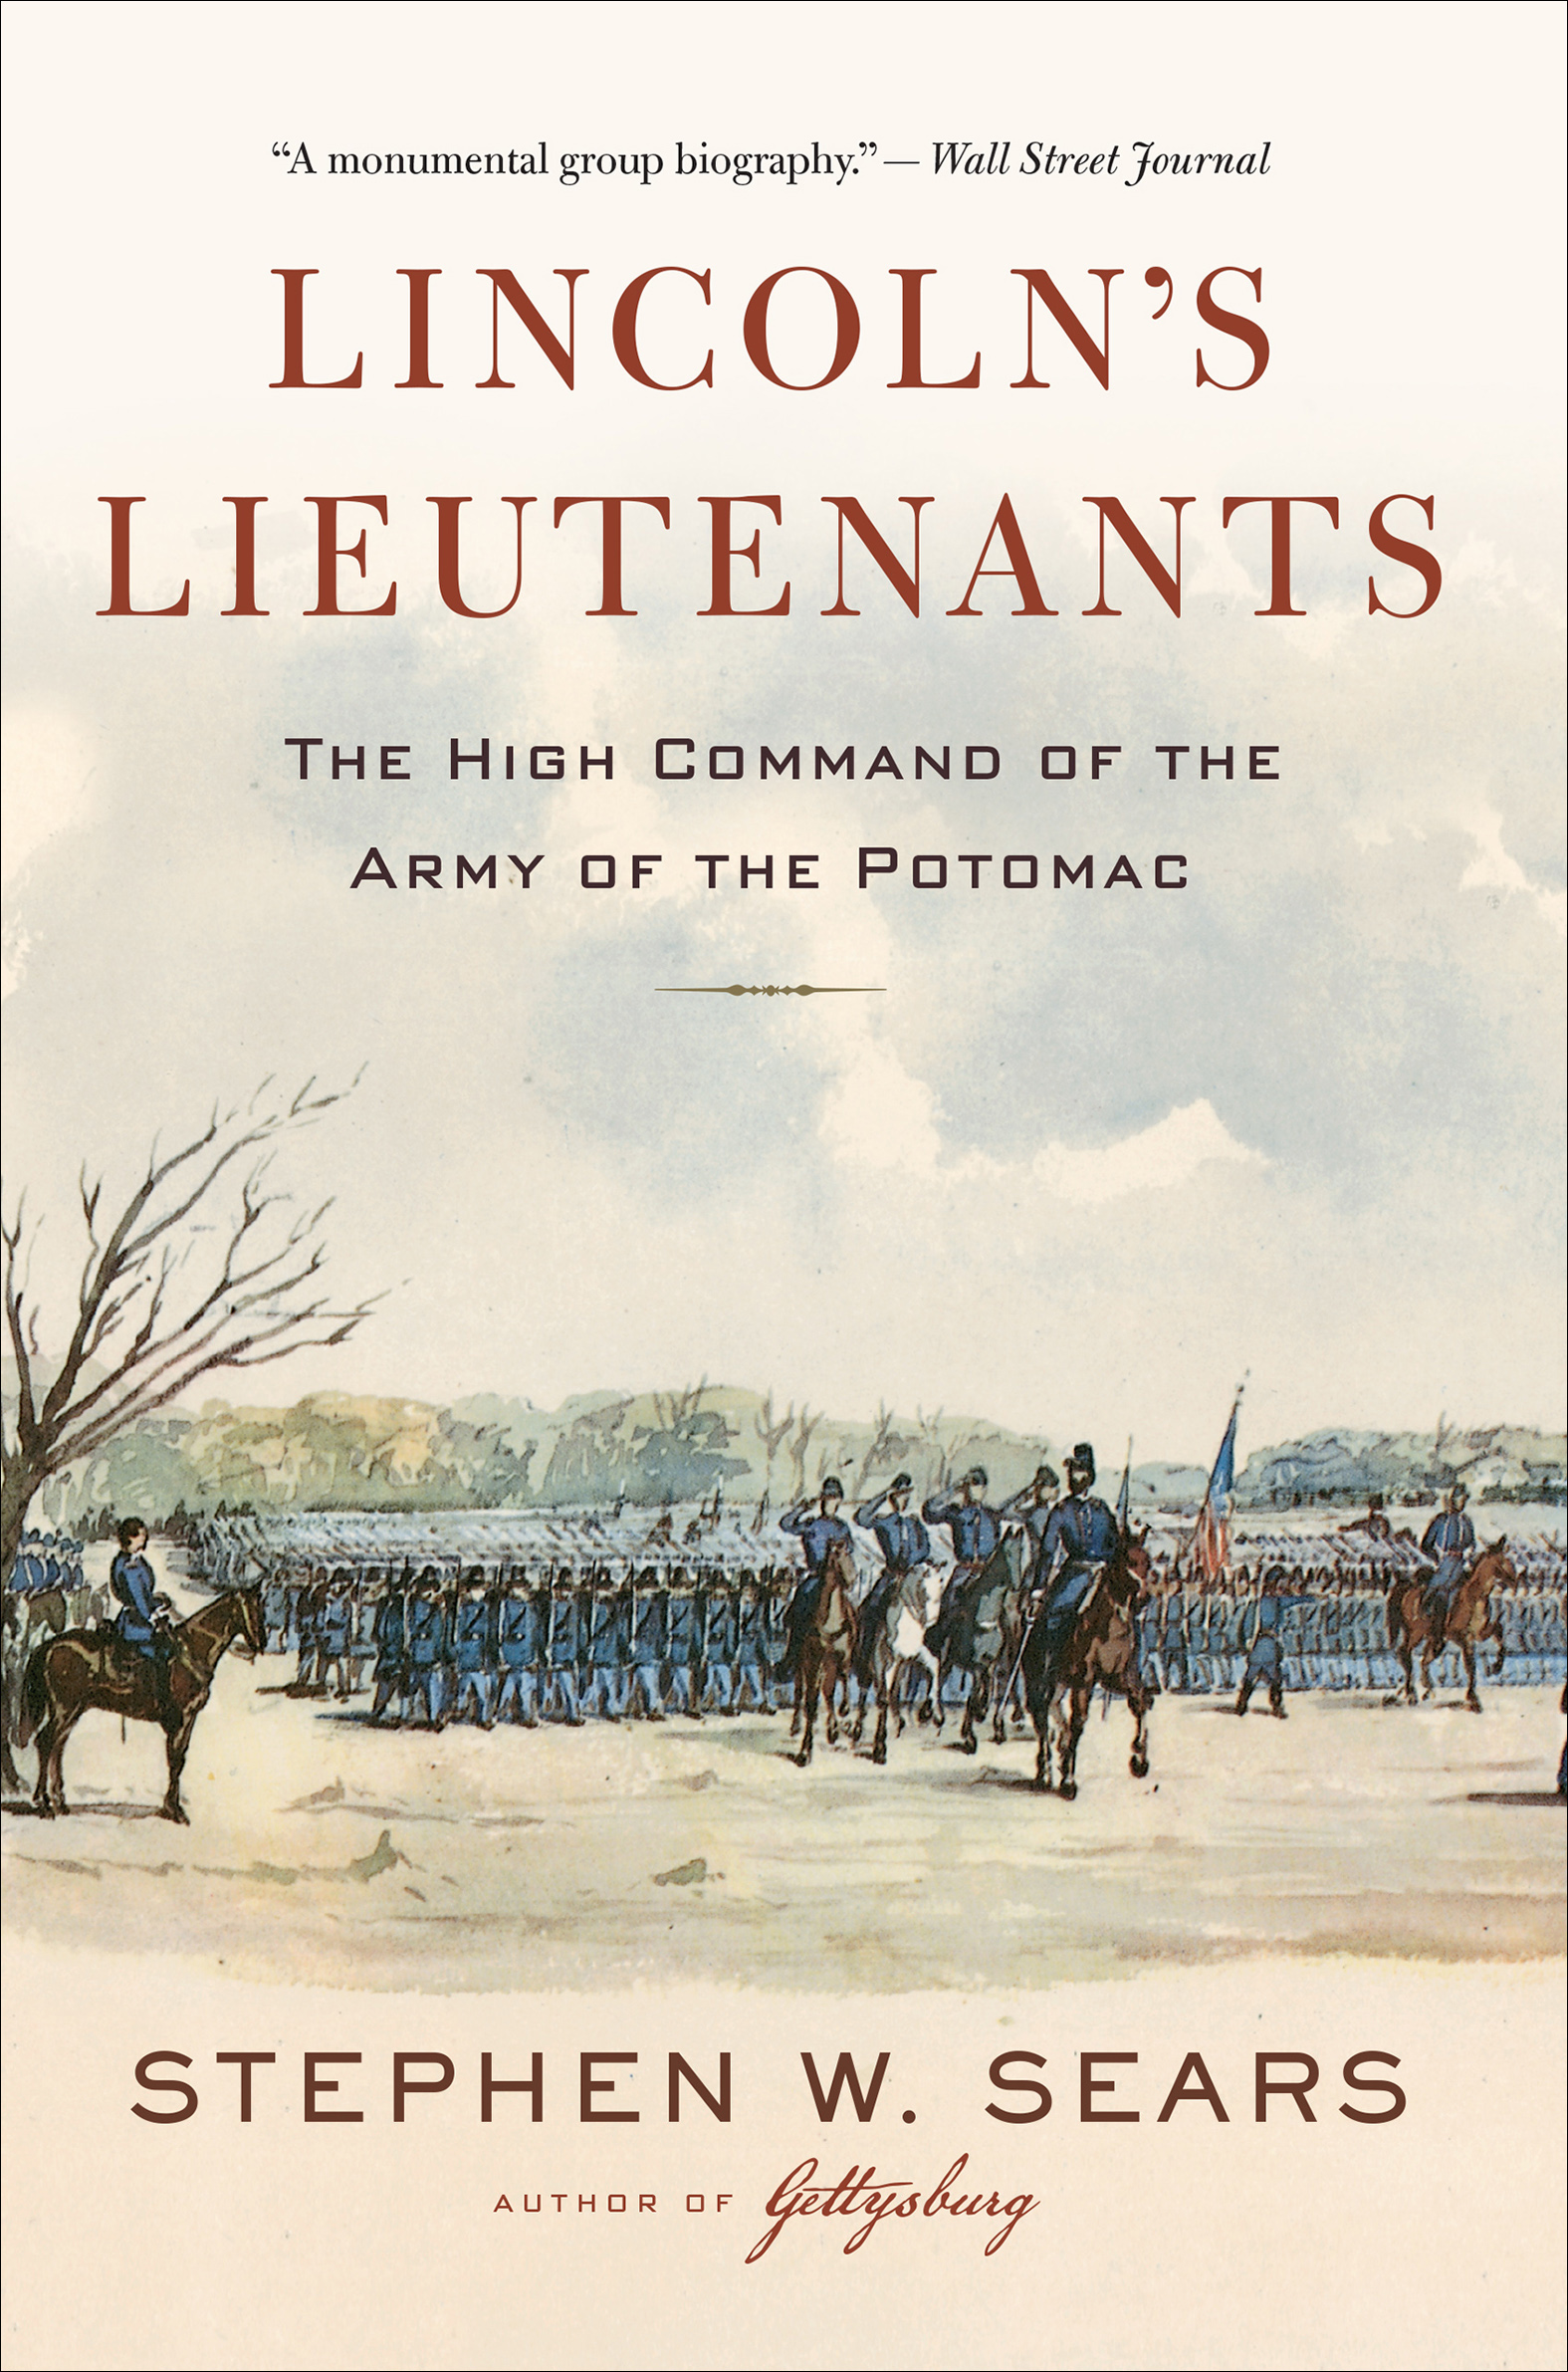 Image de couverture de Lincoln's Lieutenants [electronic resource] : The High Command of the Army of the Potomac